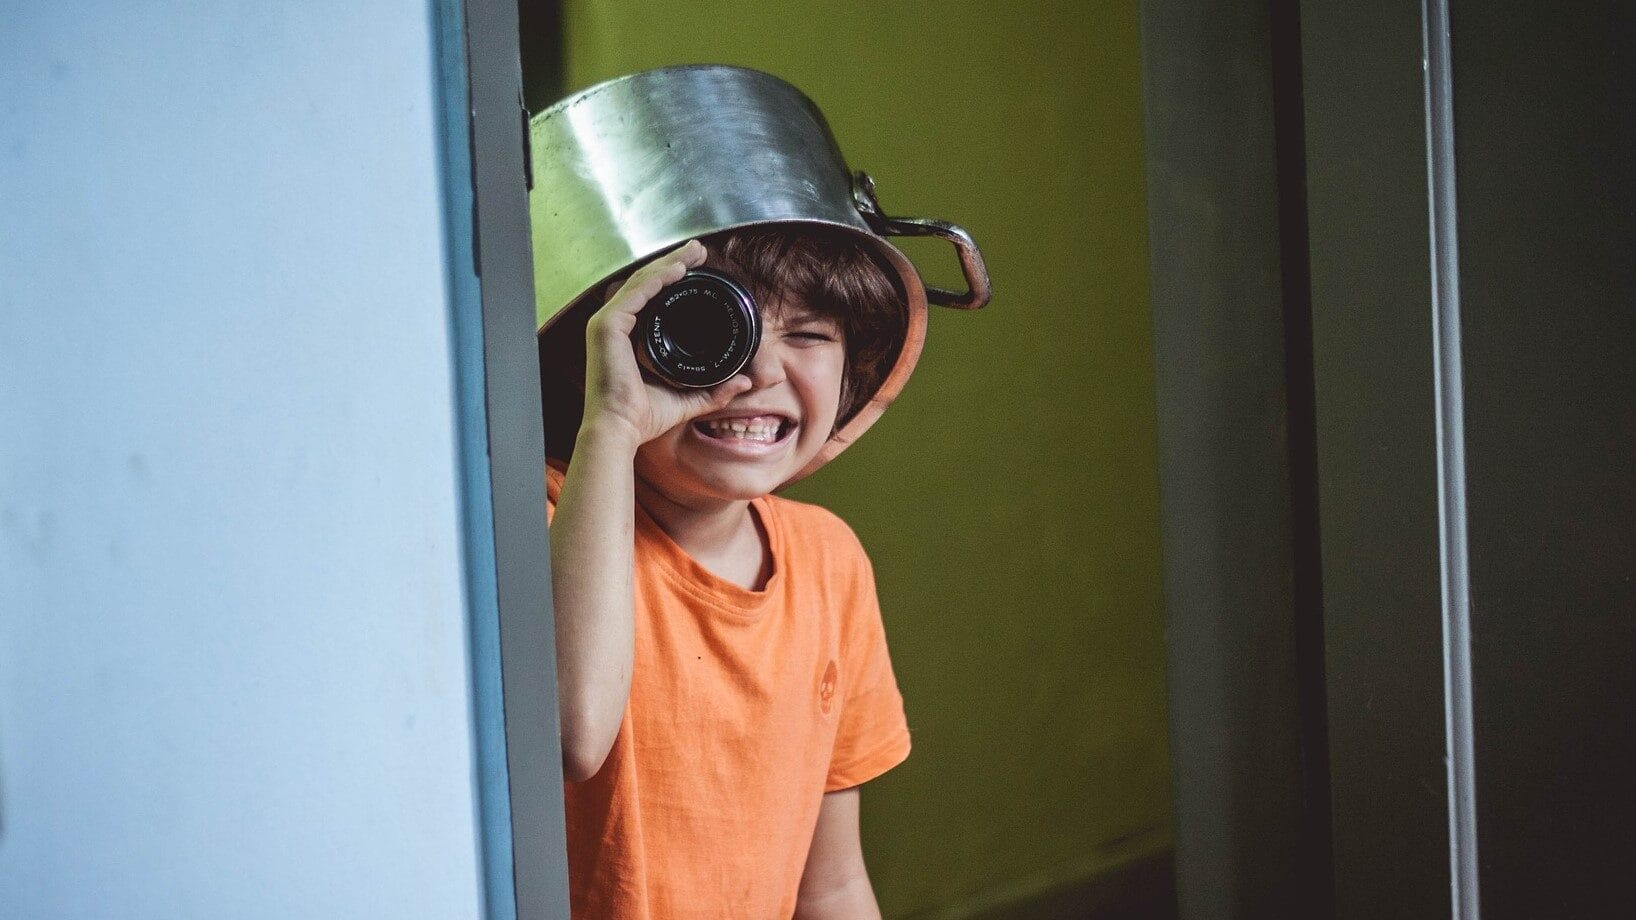 Image: Kids being kids, Kid wearing a kitchen pot on their head, peeking around the corner with a camera lens as a telescope